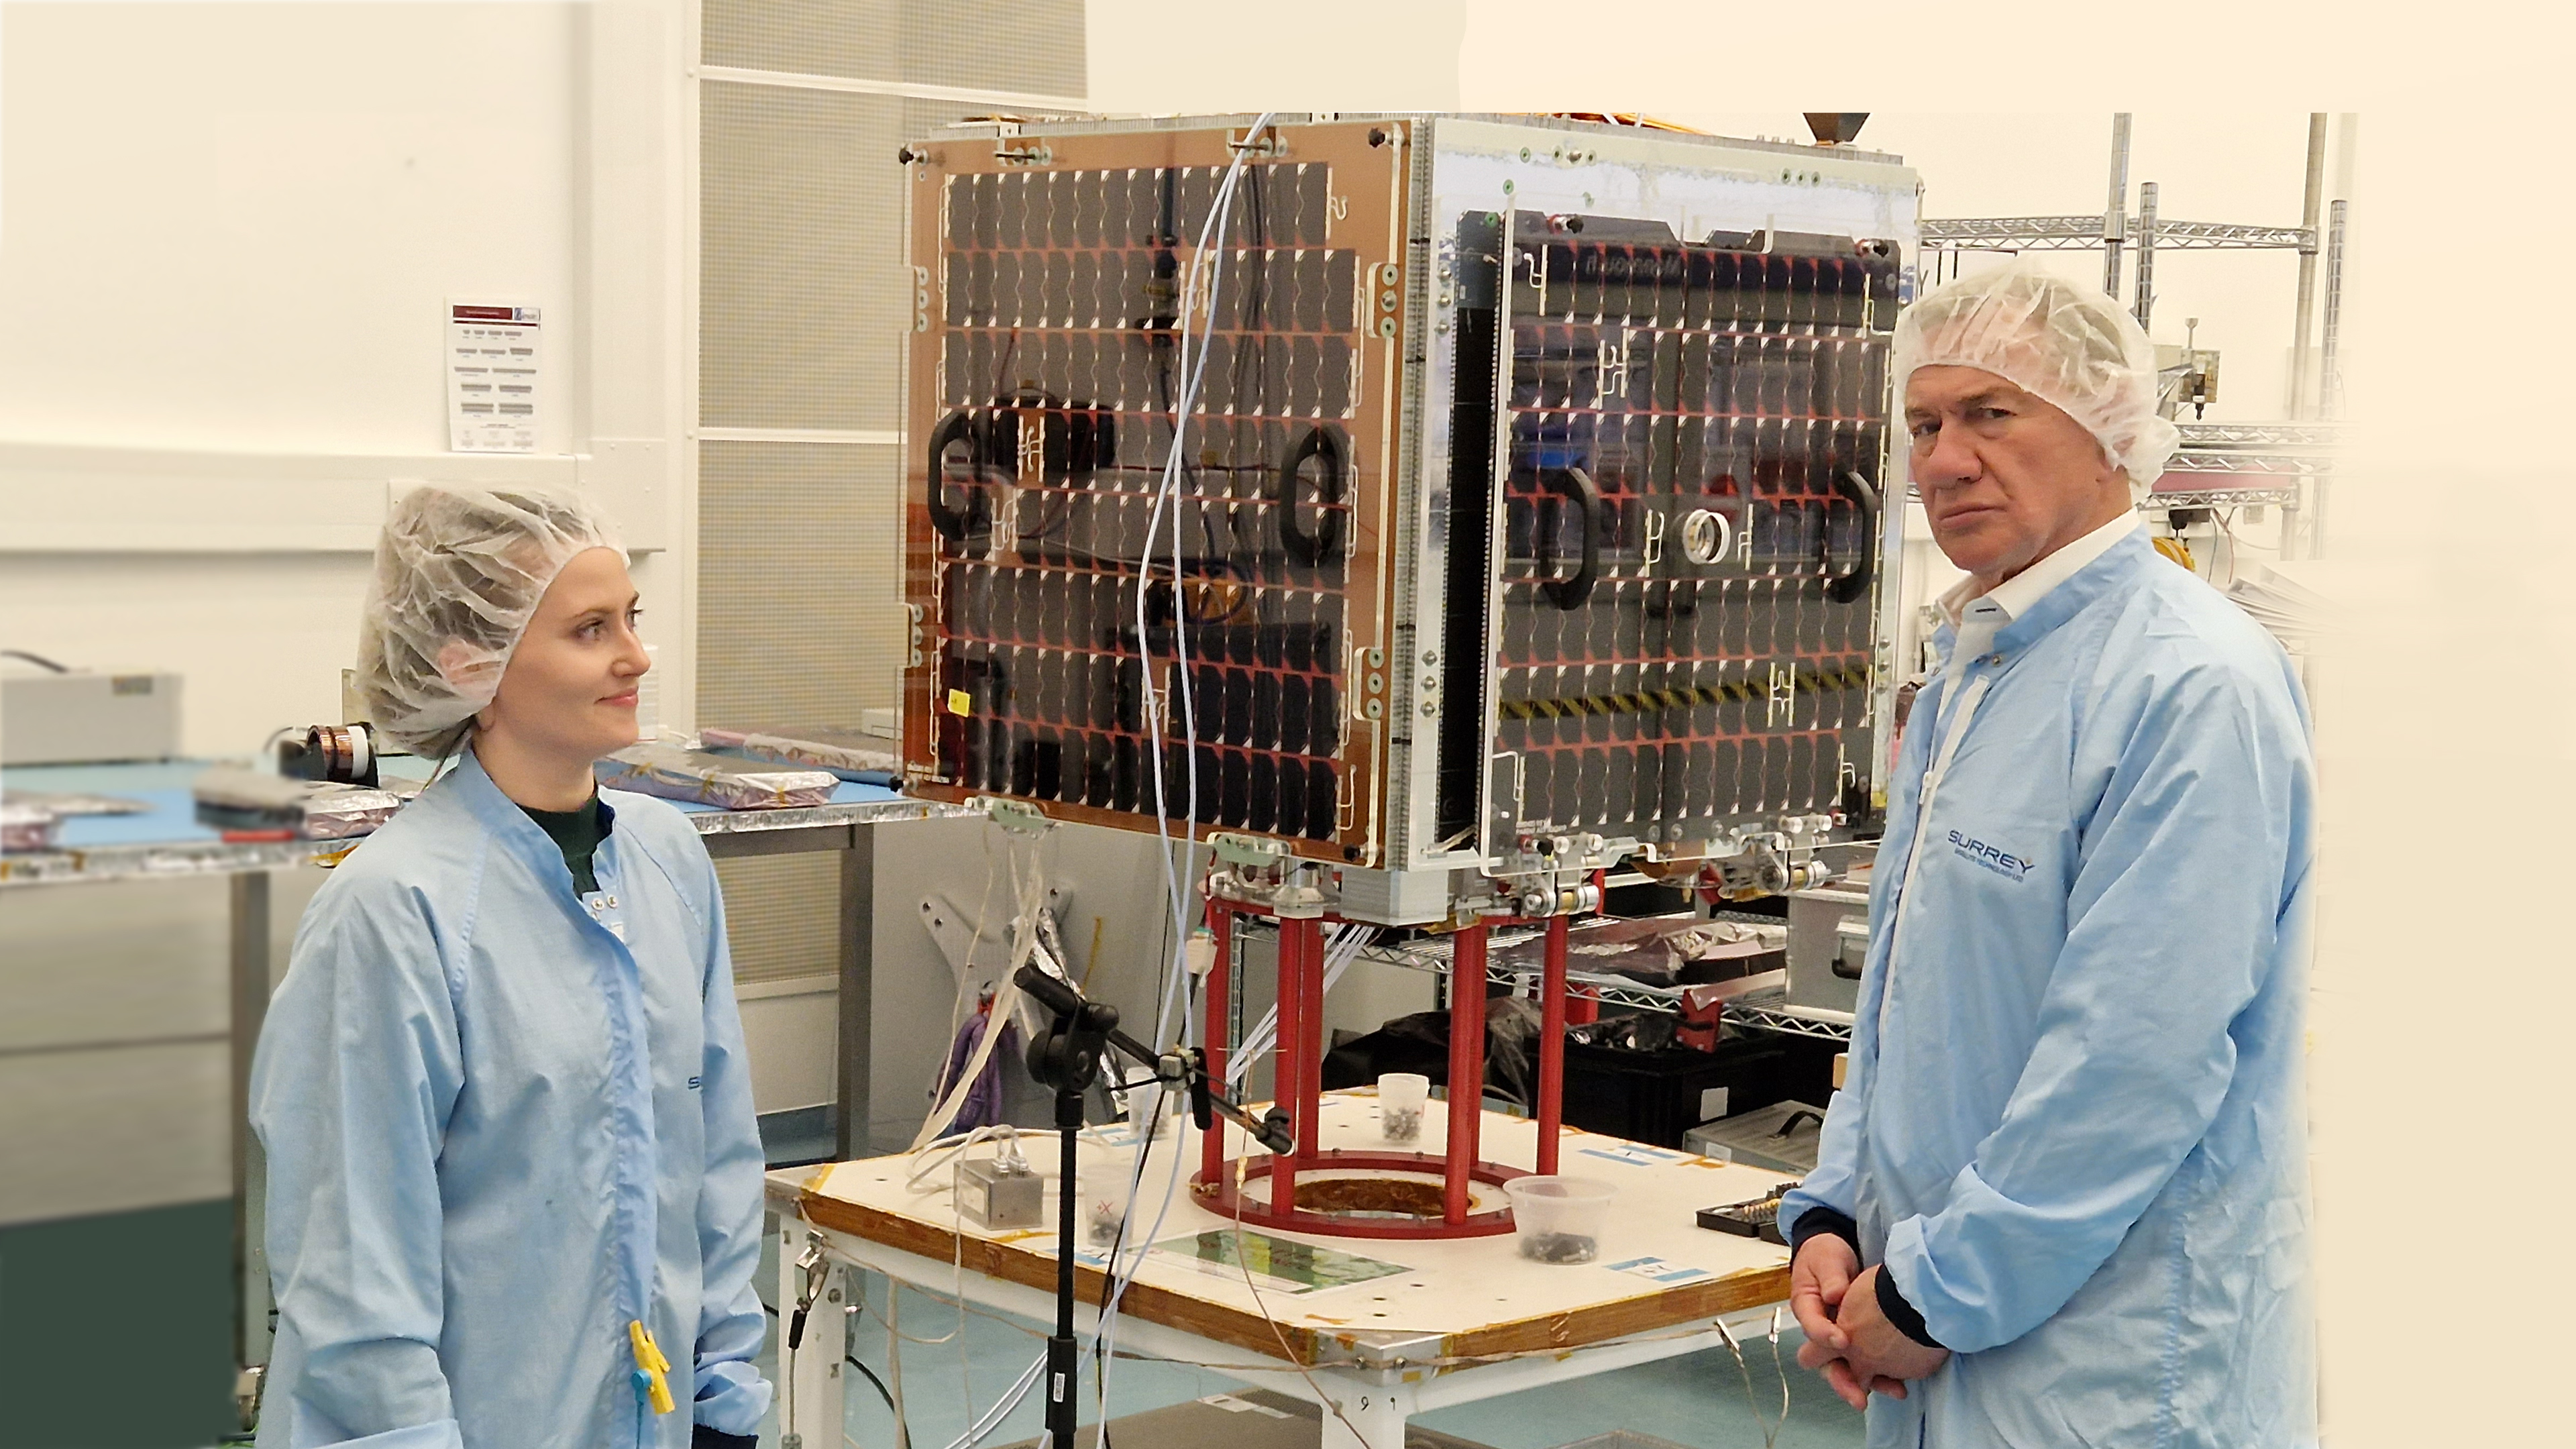 BUILDING WORLD-LEADING SMALL SATELLITES...(RECENTLY FEATURED on bbc tWO)